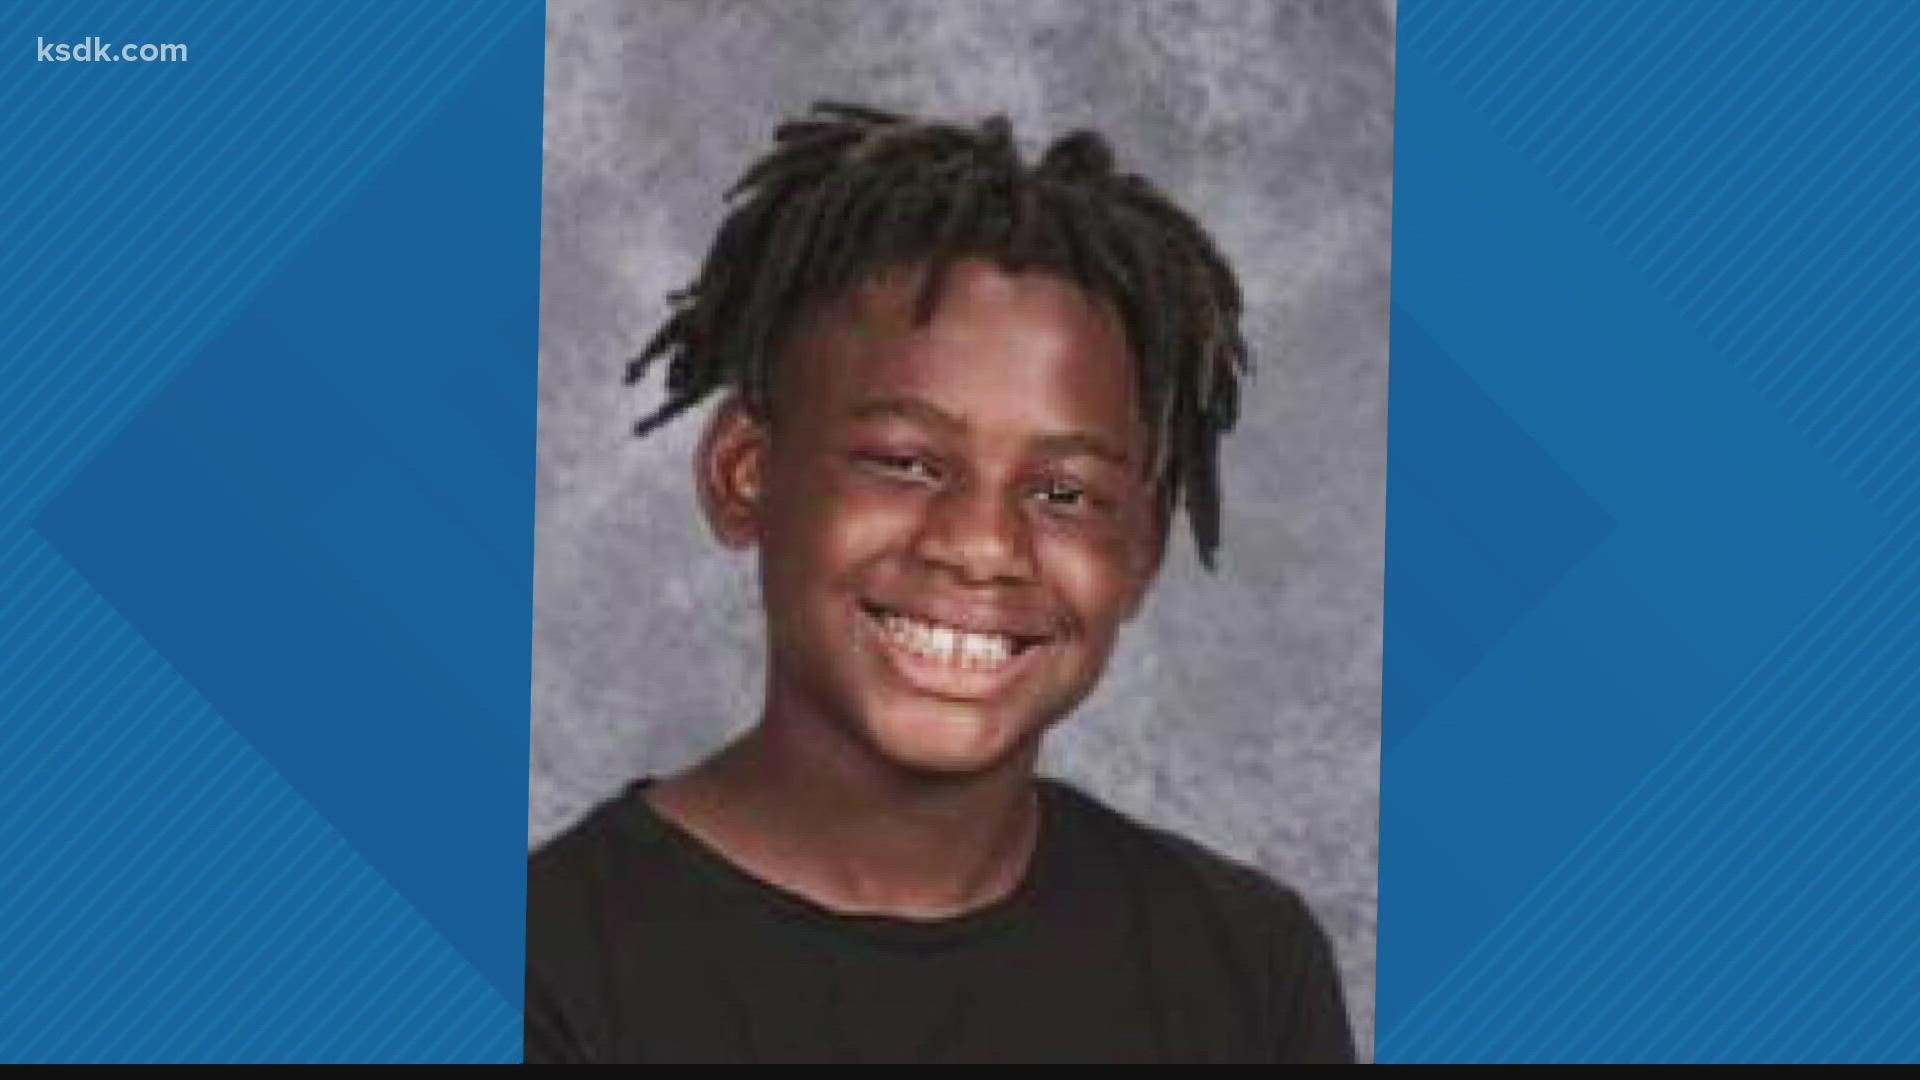 Police have released the name of a 12-year-old boy who was shot and killed in north St. Louis Tuesday night. A woman is in custody.